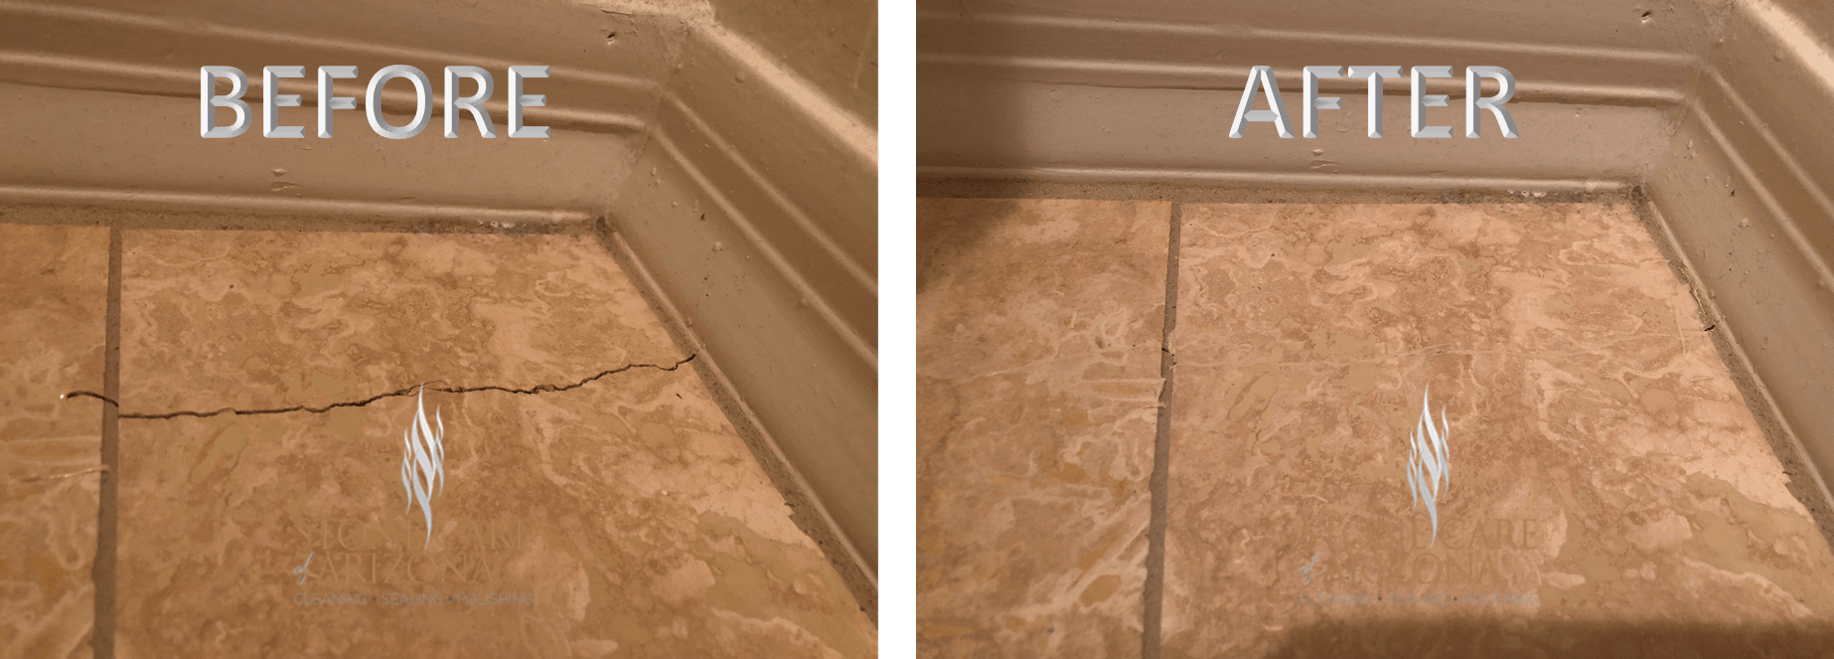 TRAVERTINE, MARBLE & LIMESTONE CRACK REPAIRS BEFORE AND AFTER